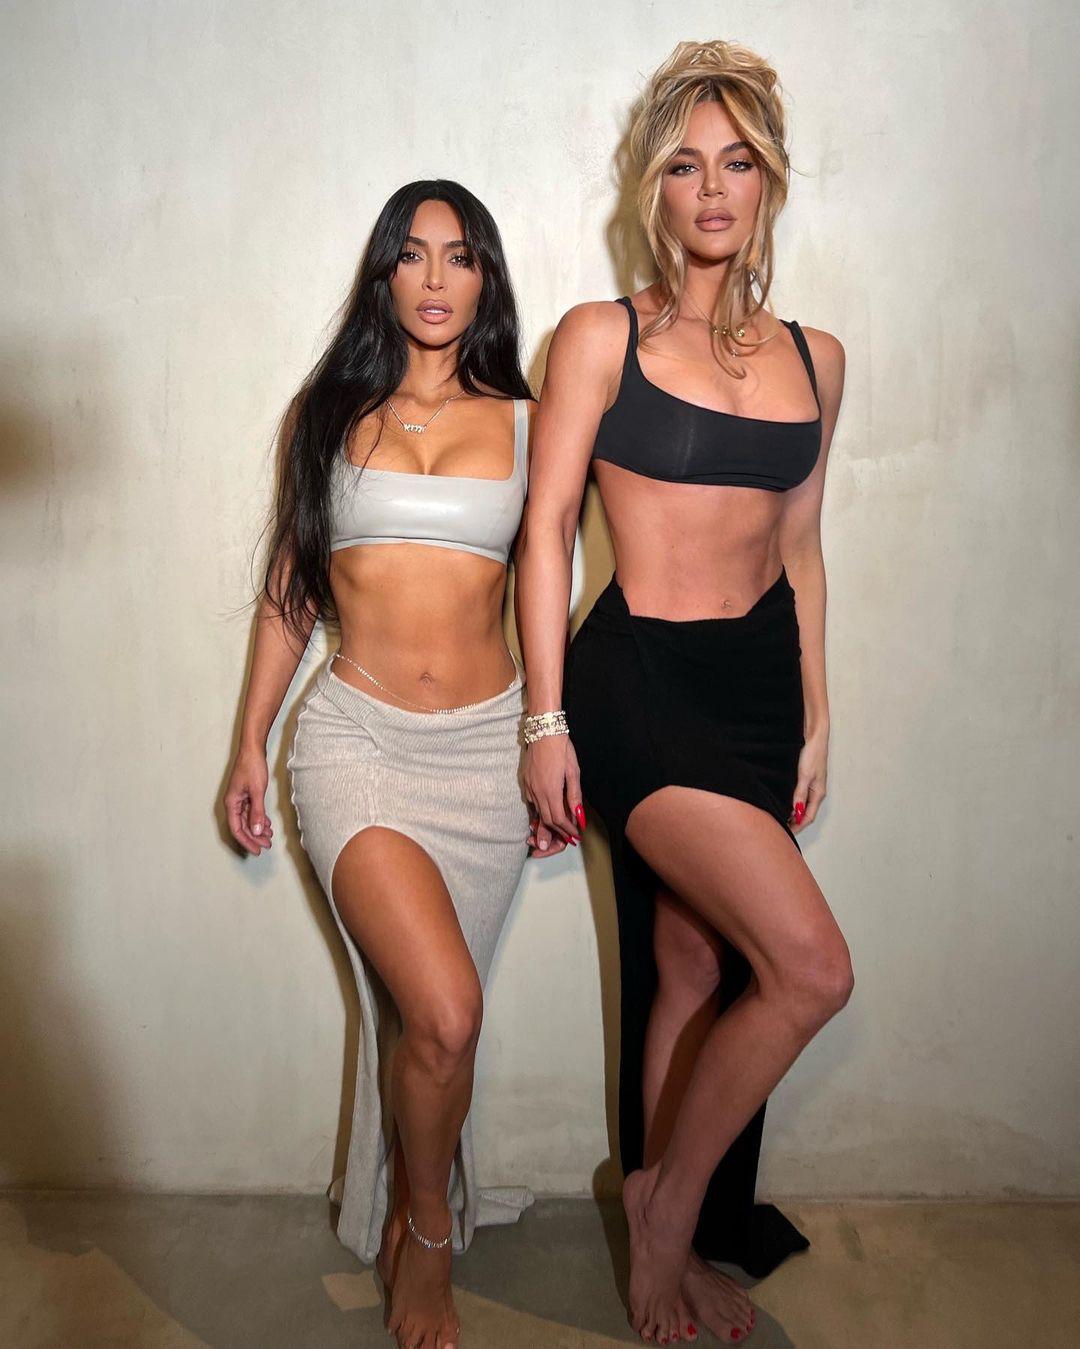 Kim and Khloe Kardashian rock matching outfits with matching abs